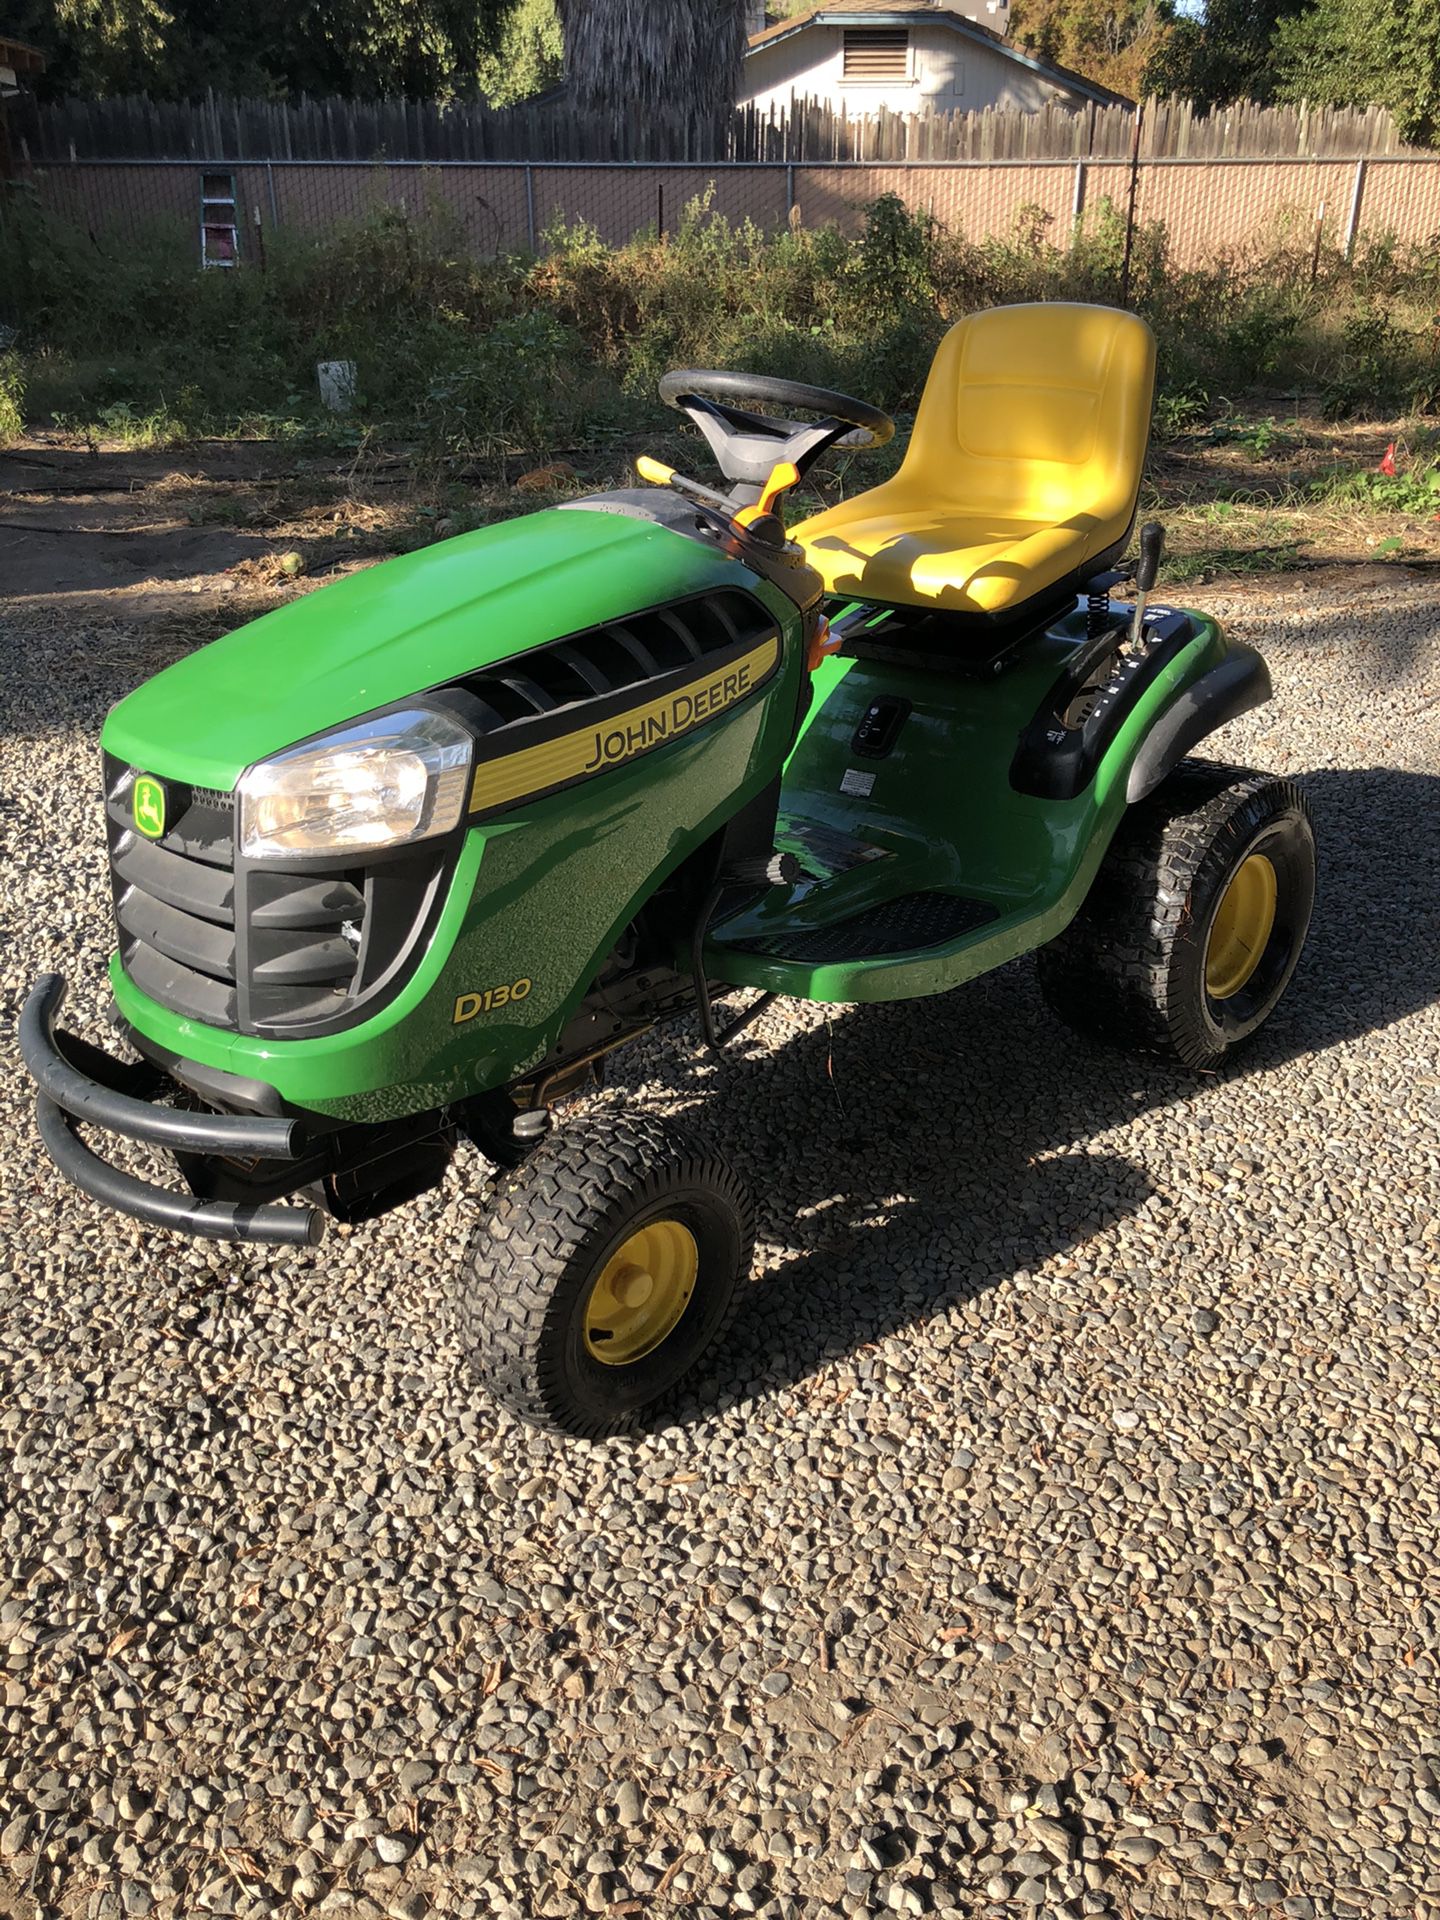 John deer tractor works fine hardly used best offer takes it